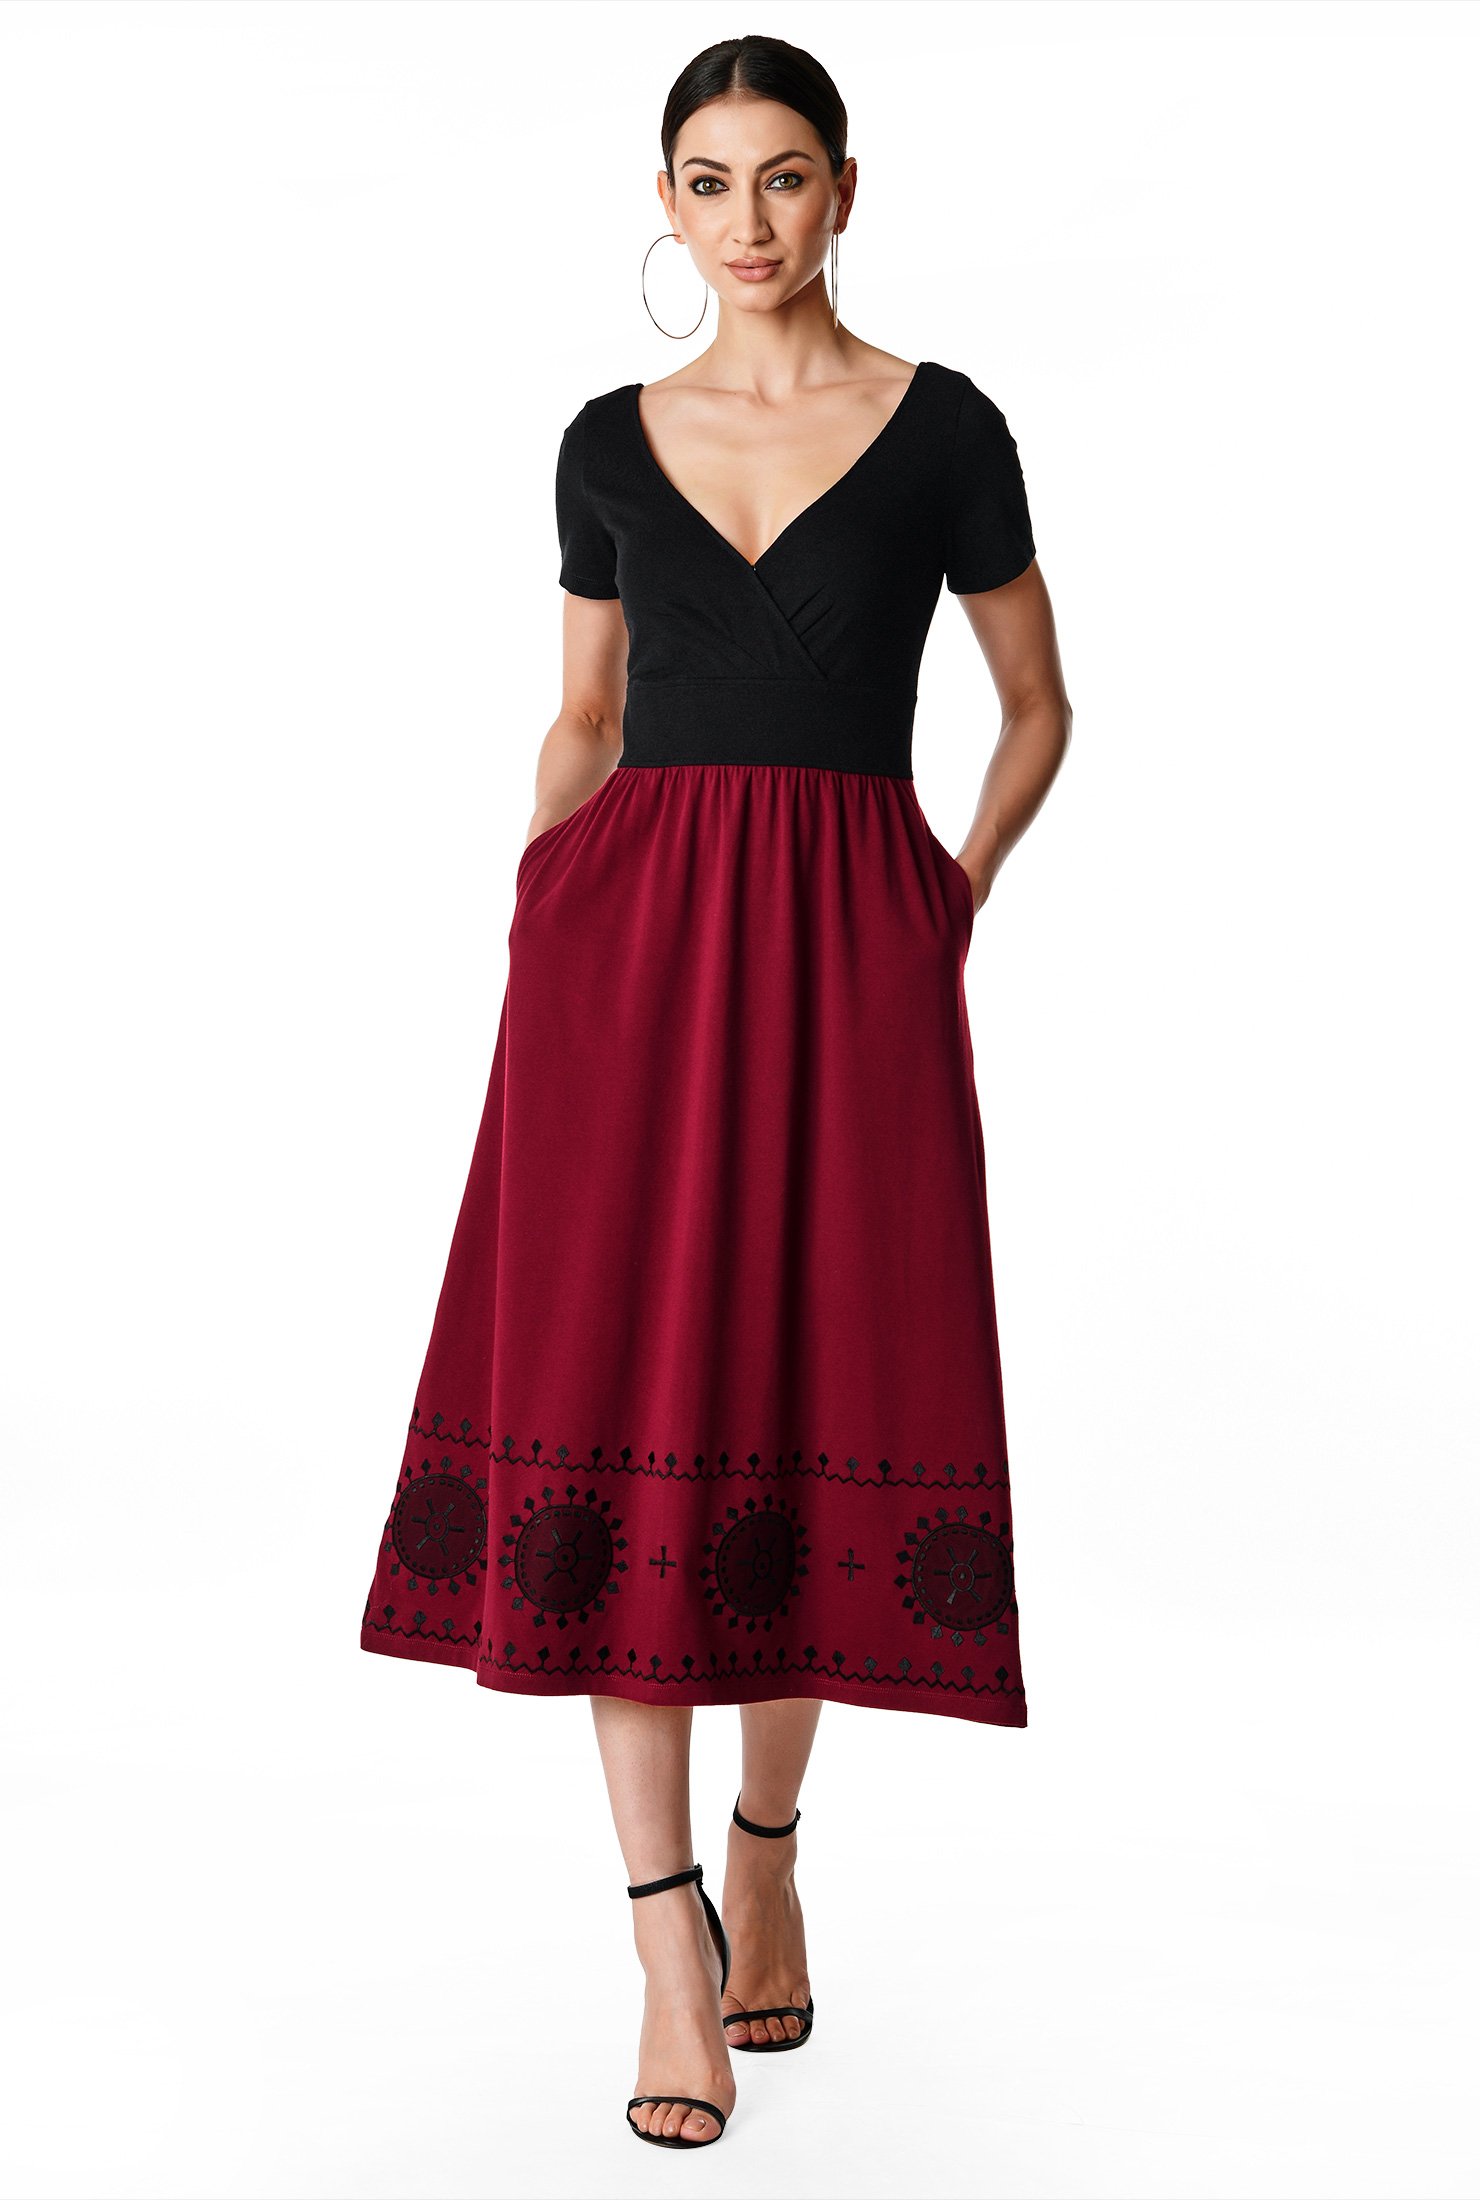 Graphic embroidery at the hem textures our cotton jersey color block dress designed with effortlessly flattering surplice styling and a midi-length skirt.